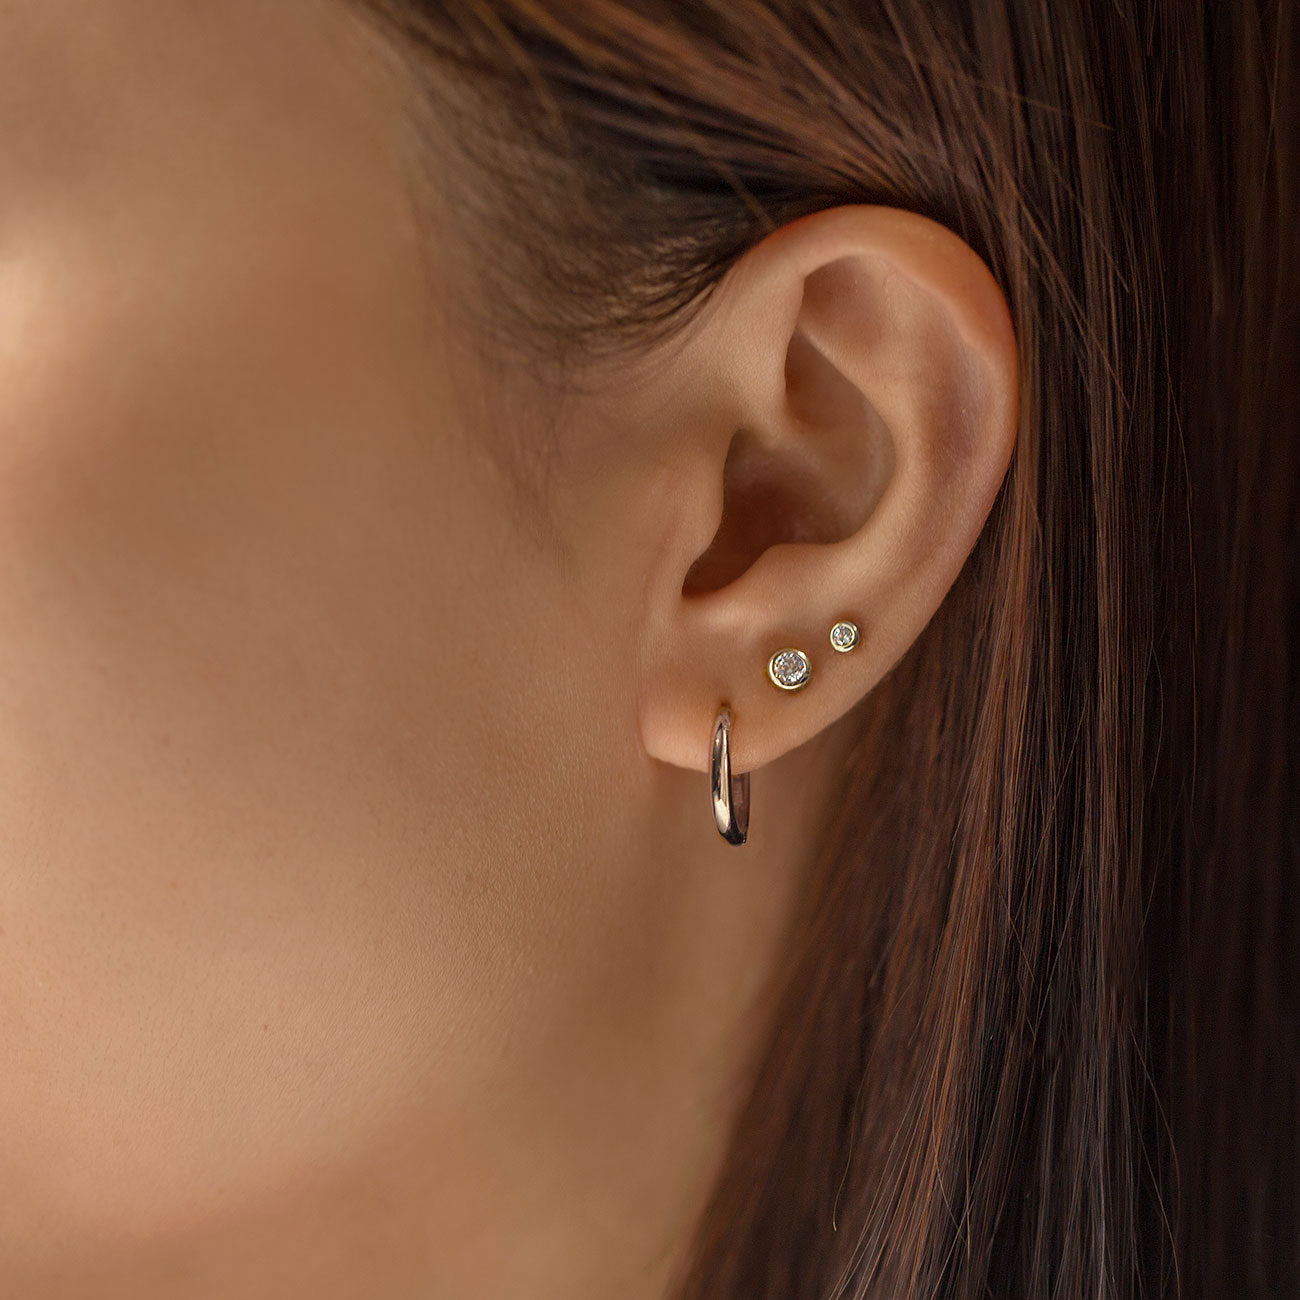 caption: Model wearing 4mm on second and 3mm on third hole